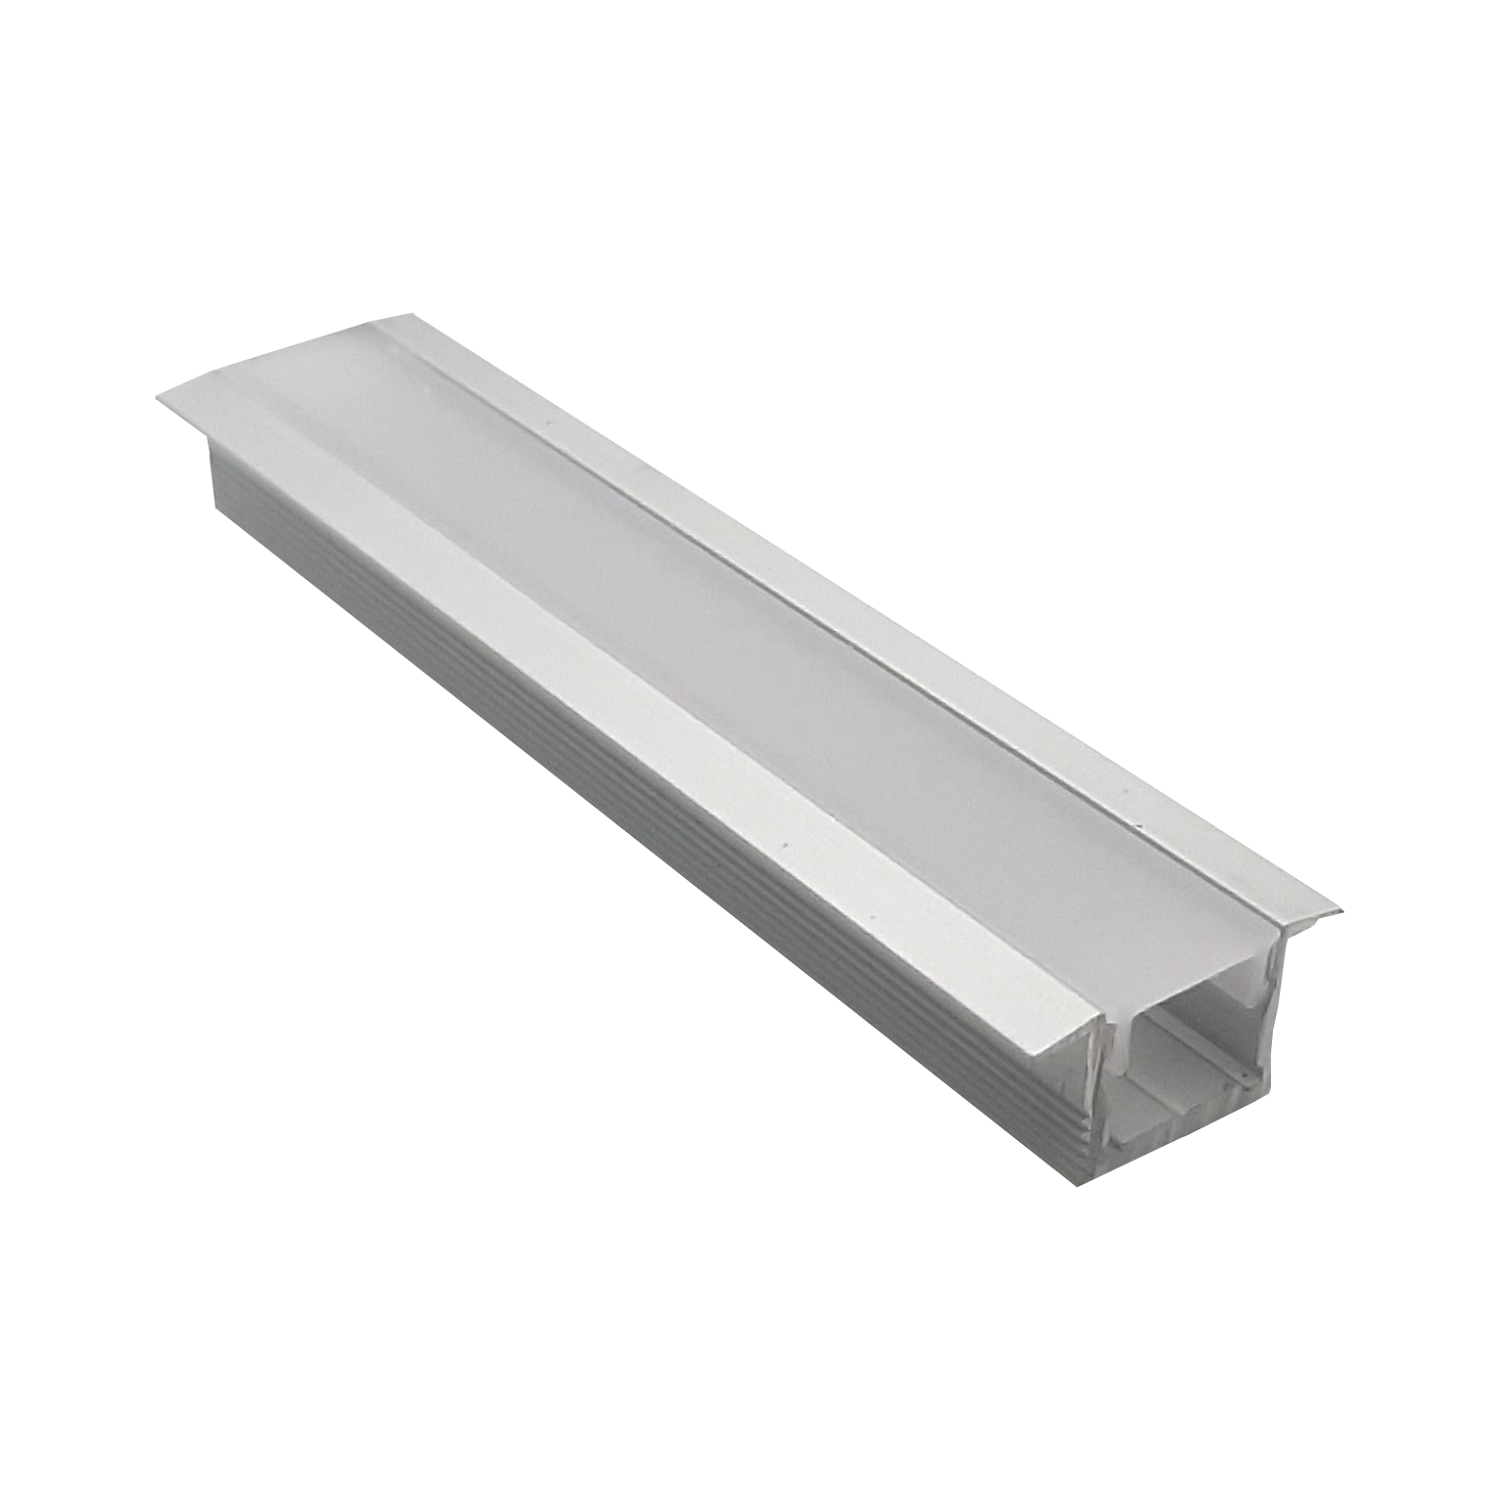 Product image of LXT14 Aluminium Deep Extrusion with Wings for LED Strip